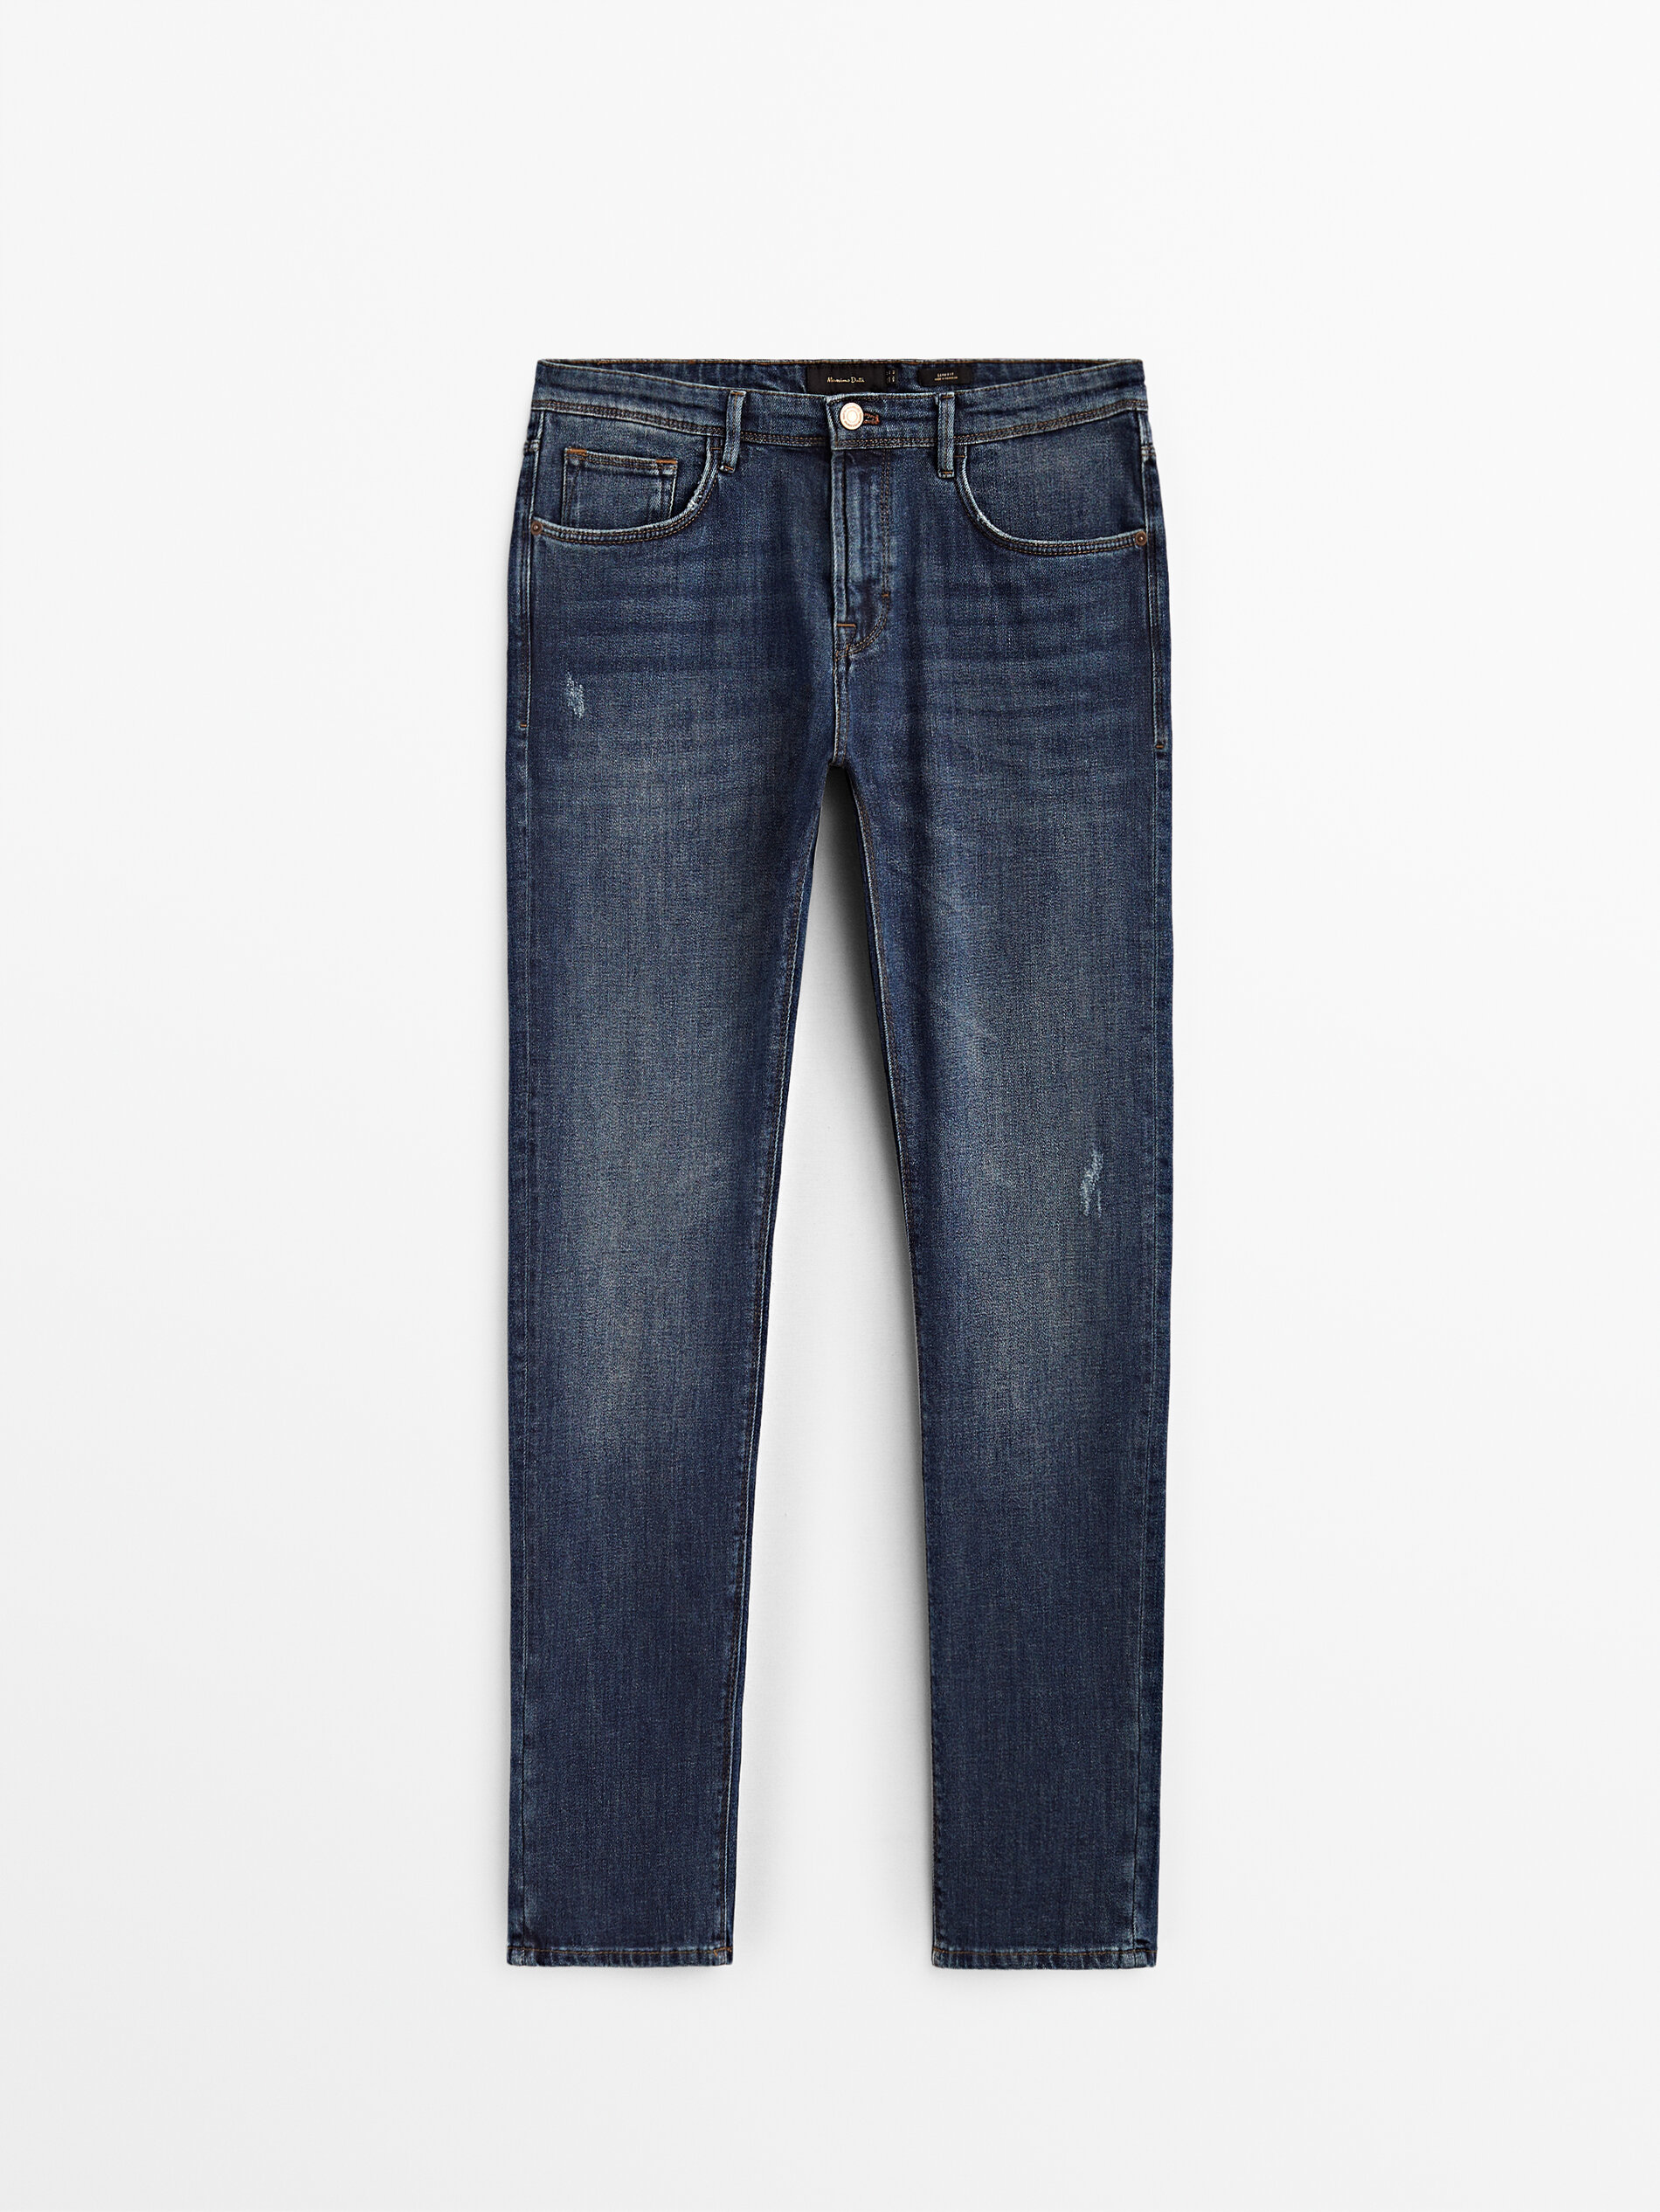 Slim fit worn effect jeans - Massimo Dutti United States of America